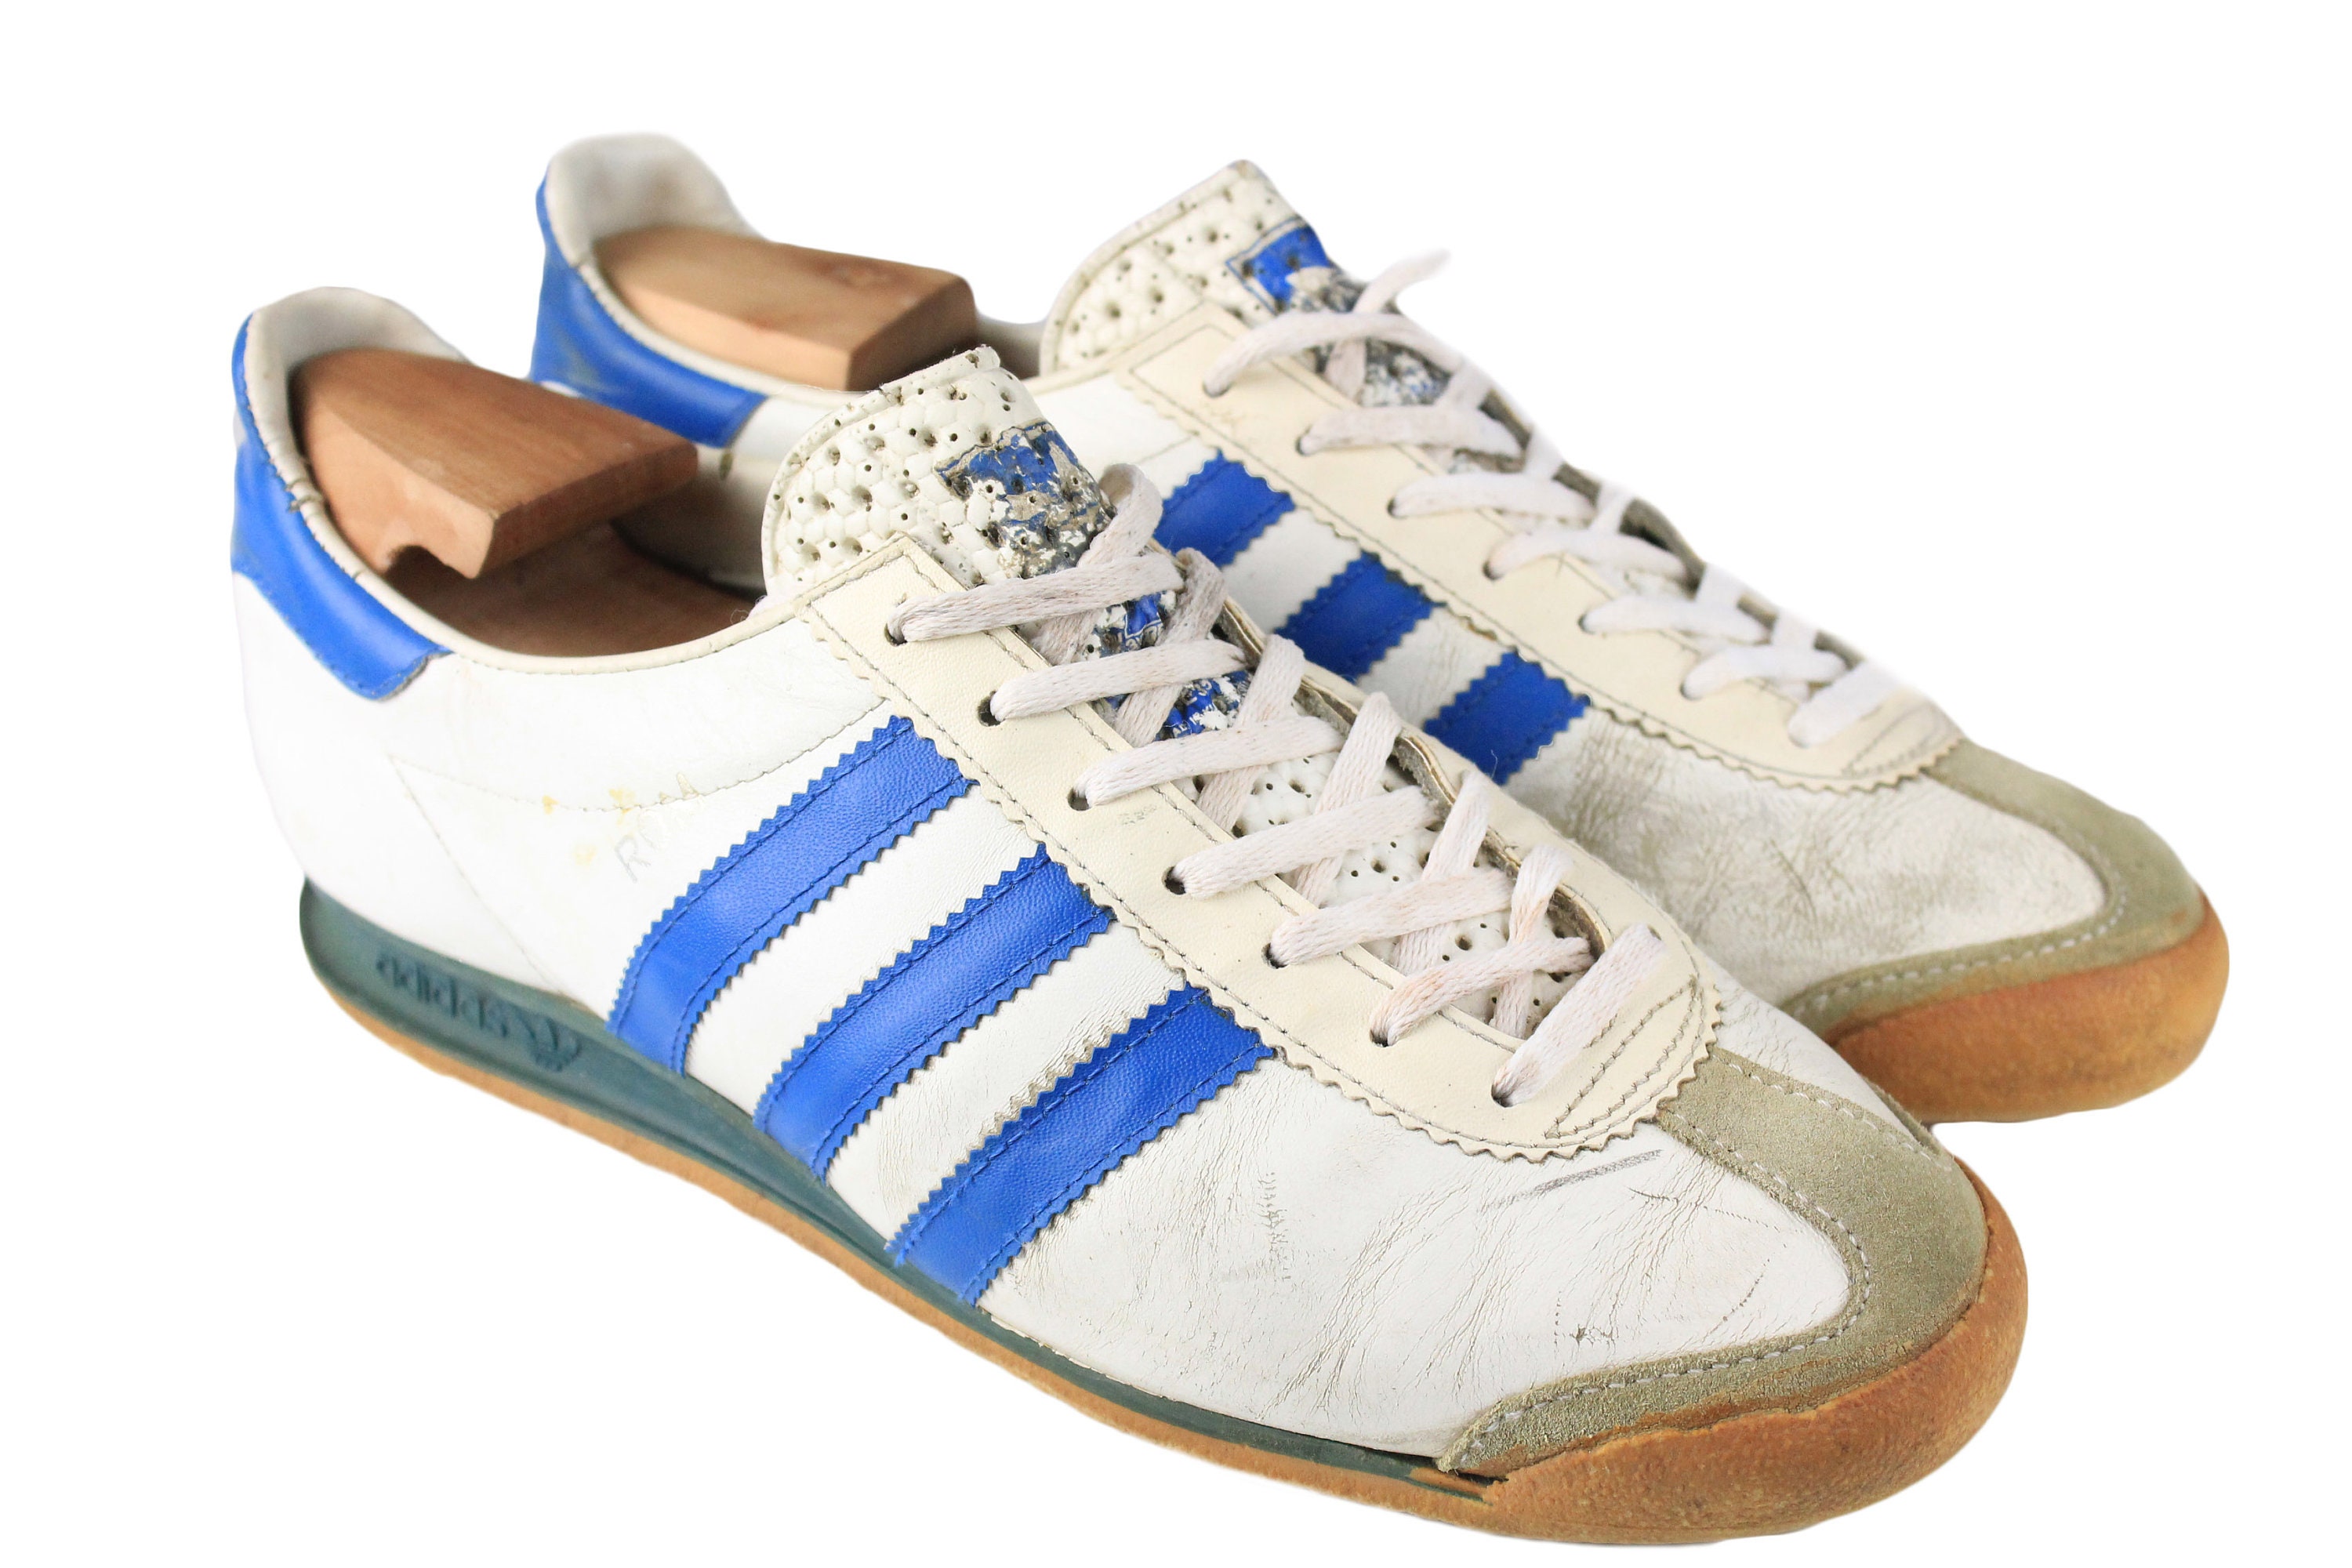 Vintage Adidas Sneakers US 10.5 Men's Authentic Rare Retro Basic Athletic Shoes 90s White Blue Classic Sport Trainers Streetwear 3 Strips